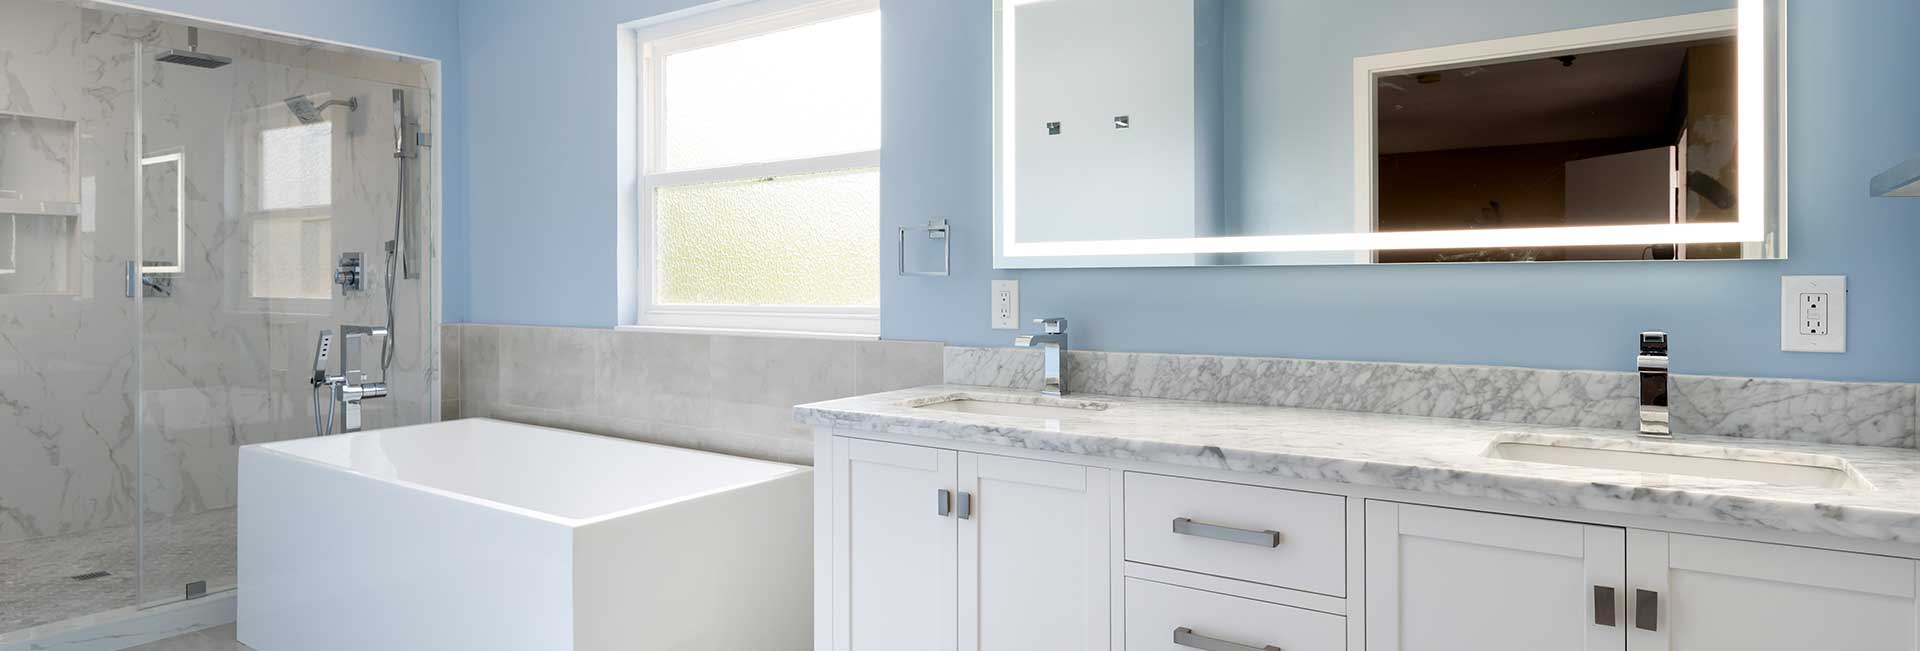 Eight bathroom maintenance tips to keep your bathroom clean and functioning well